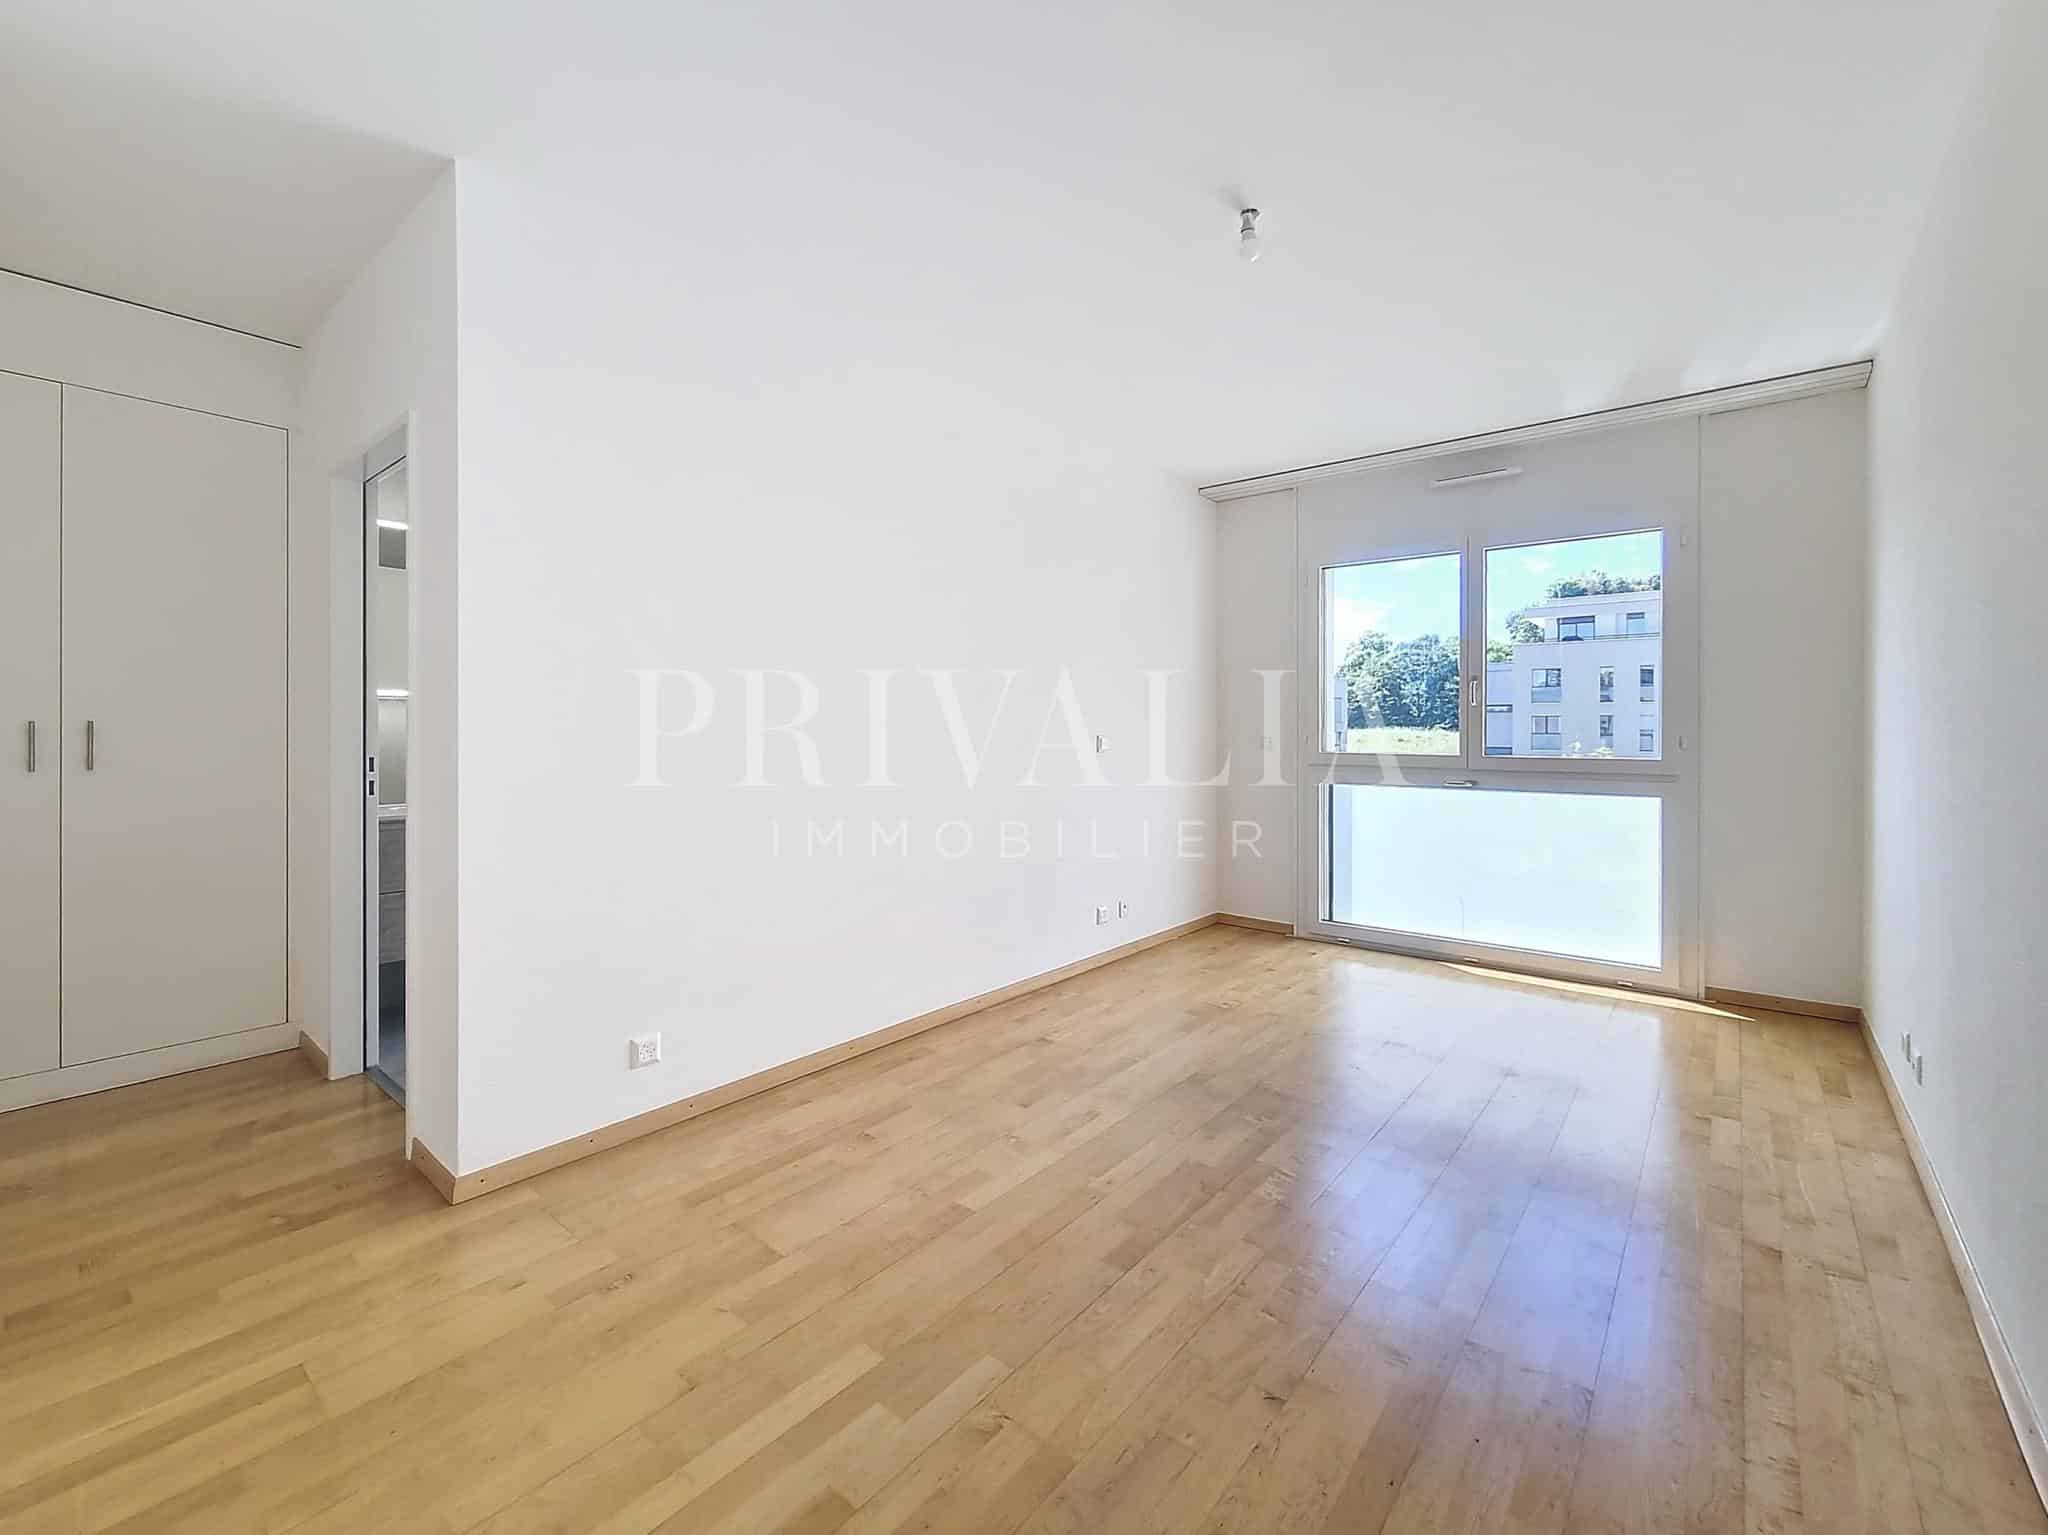 PrivaliaBeautiful 5,5 rooms flat with balcony and winter garden in a secure residence